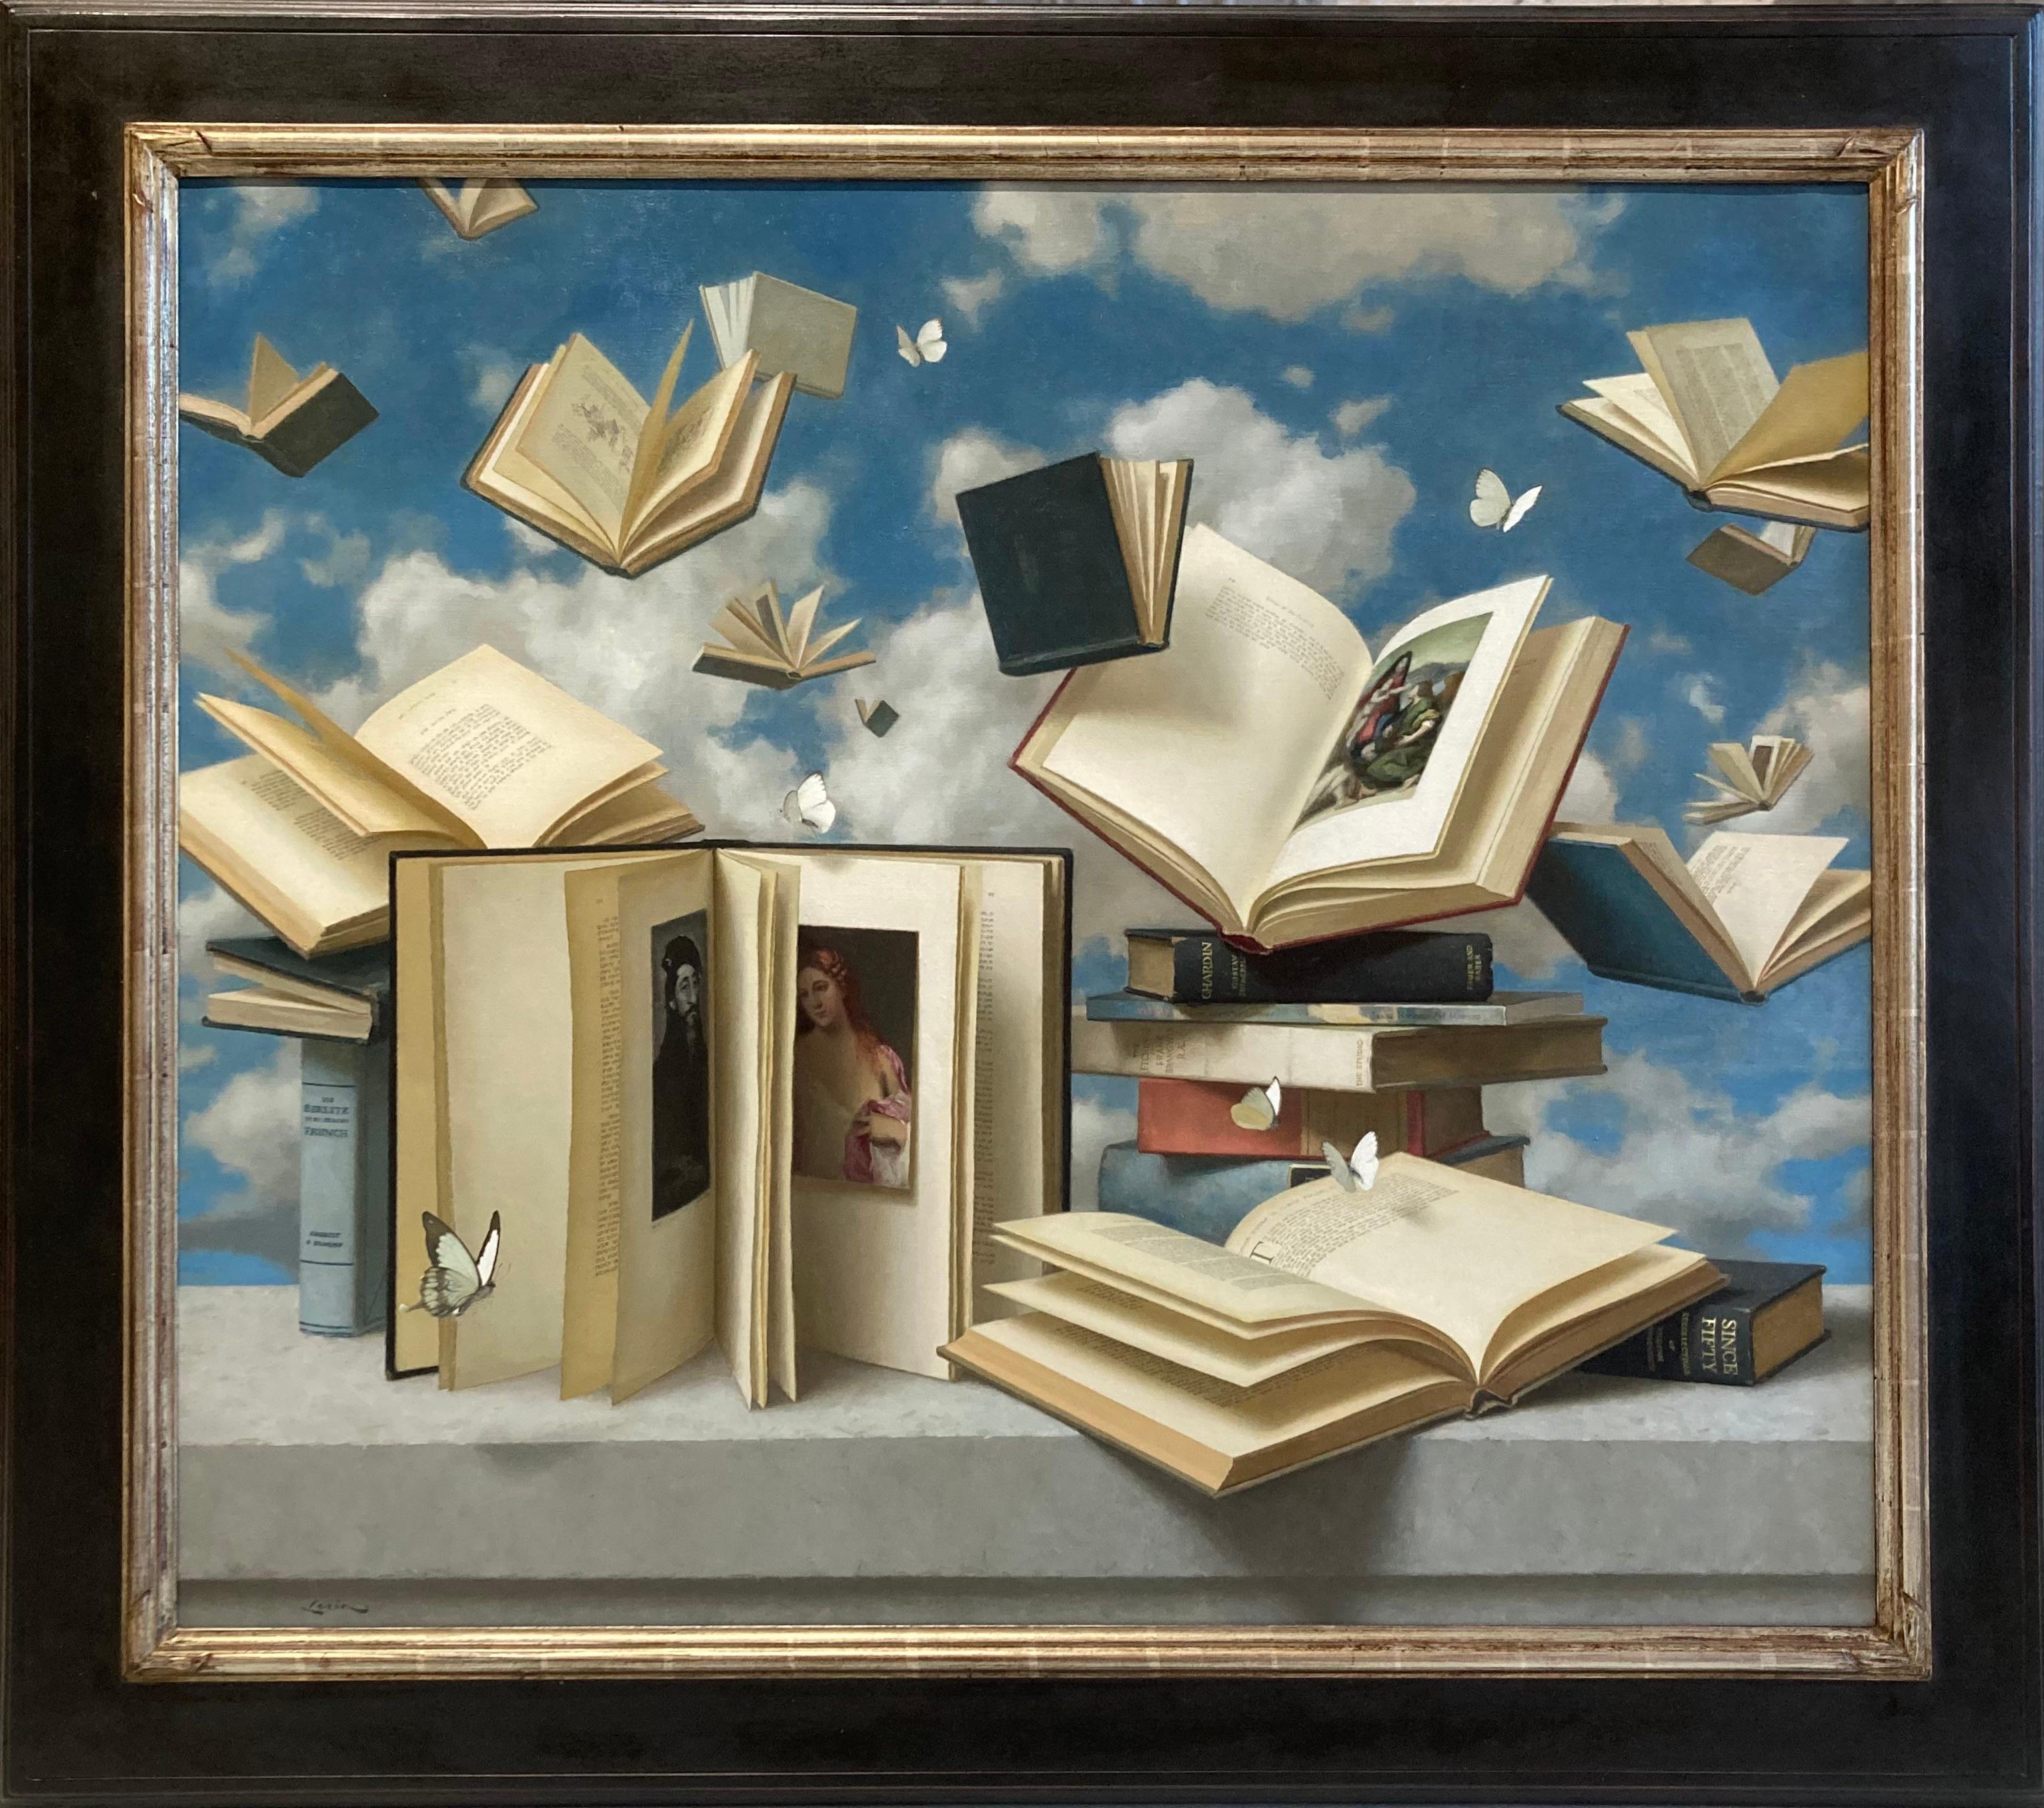 Floating Books and Butterflies - 2023 Surrealist still life and skyscape - Painting by Steven J. Levin